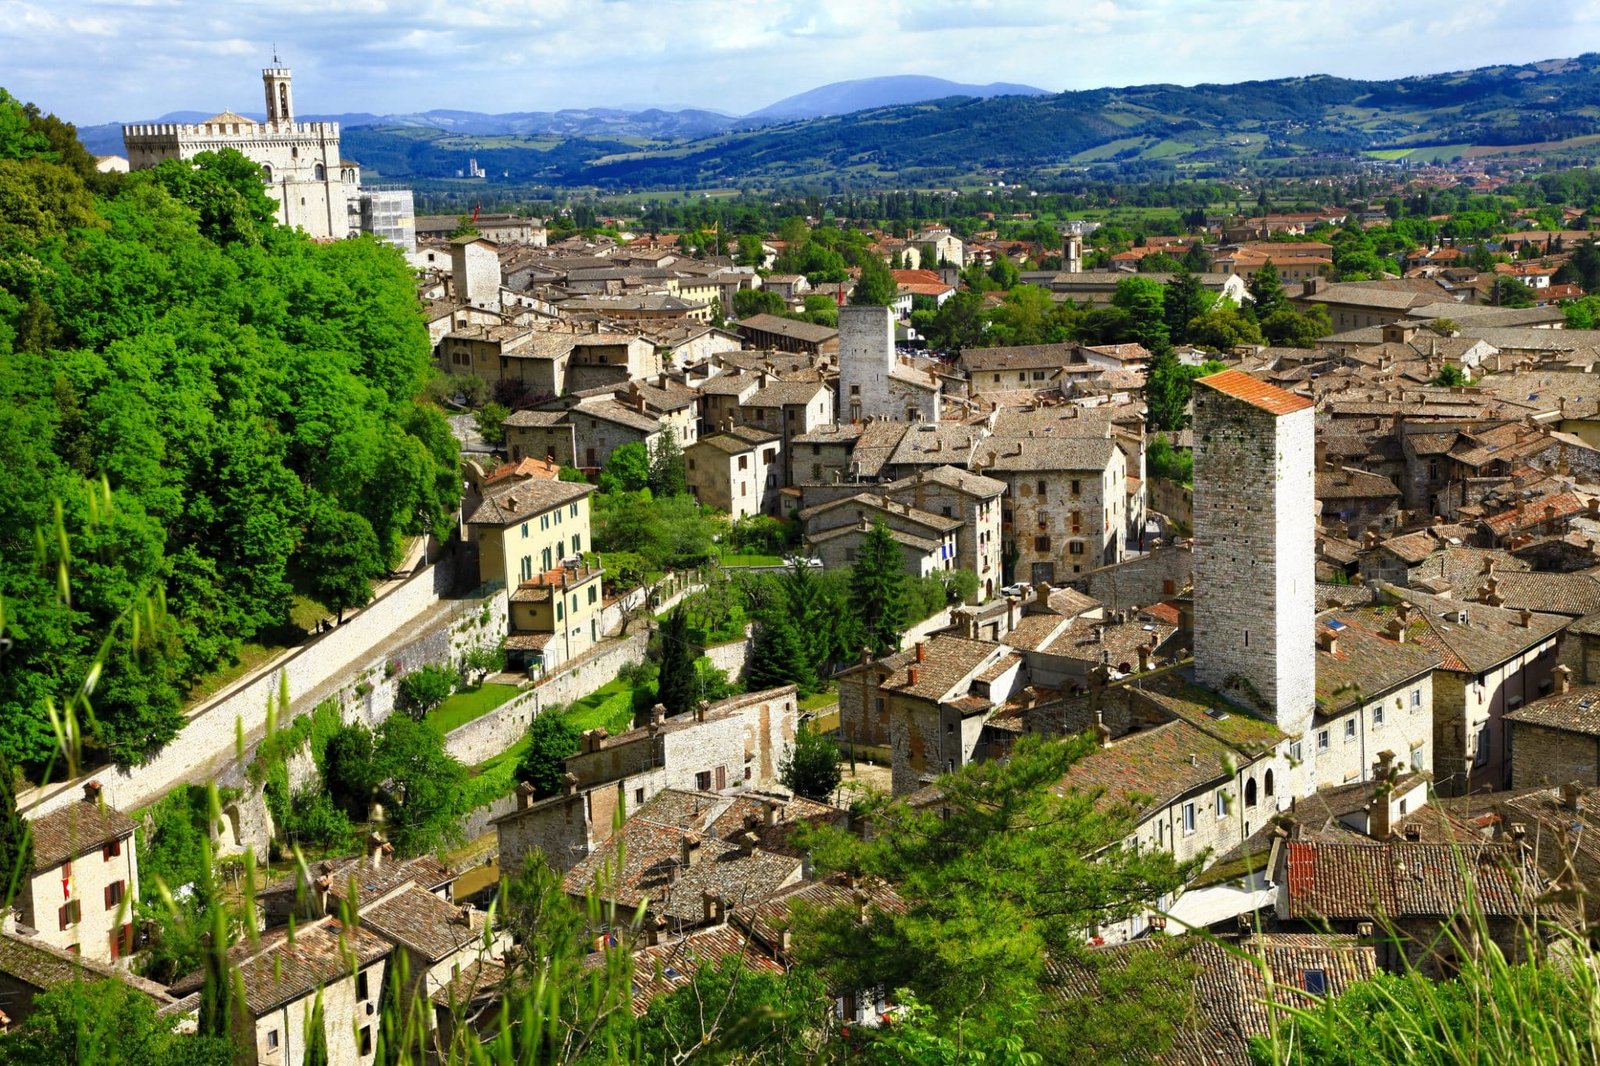 Medieval town in Umbria